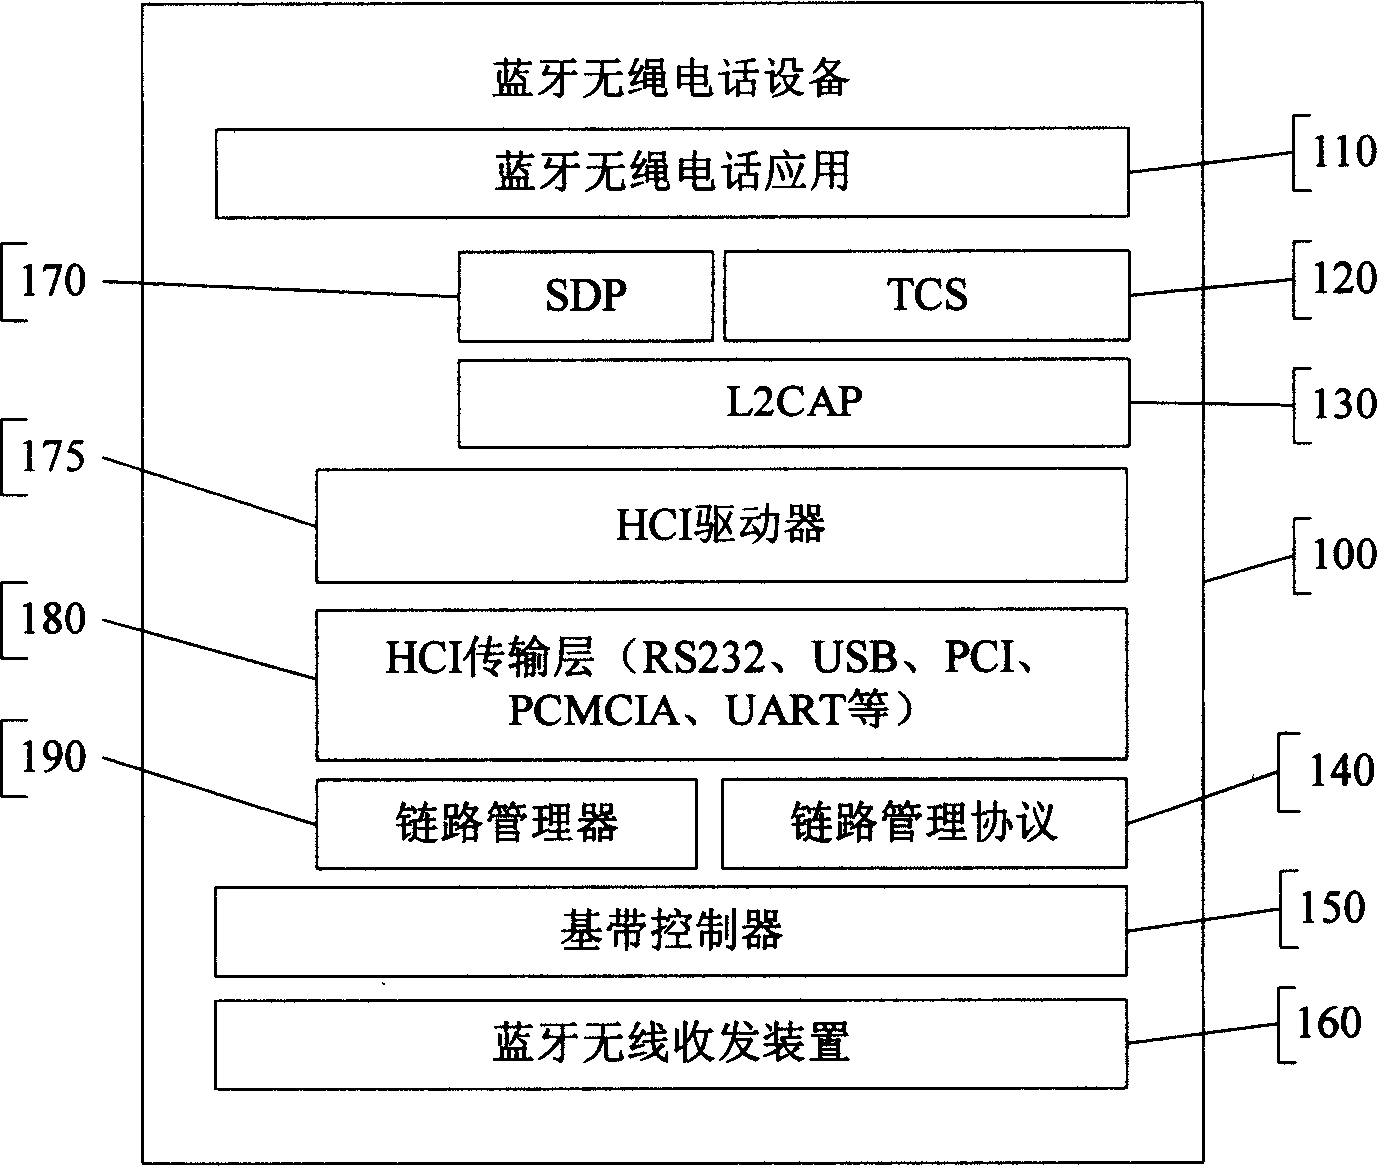 A method for implementing call forwarding of blue tooth handset by using dynamic extension number